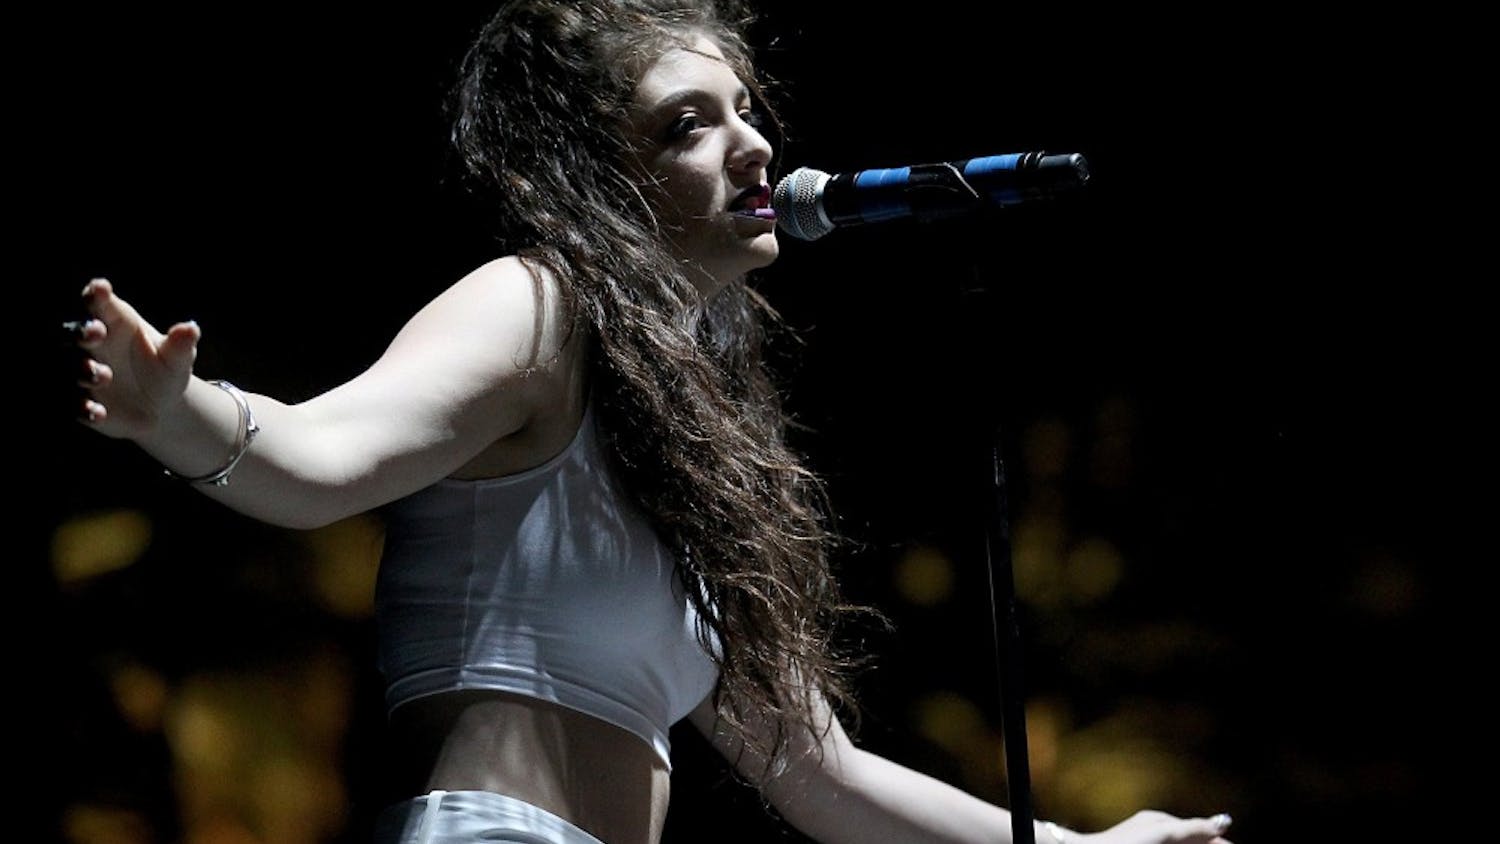 Lorde performs on the second day of the Coachella Music and Arts Festival in Indio, Calif., on Saturday, April 12, 2014. (Luis Sinco/Los Angeles Times/MCT)